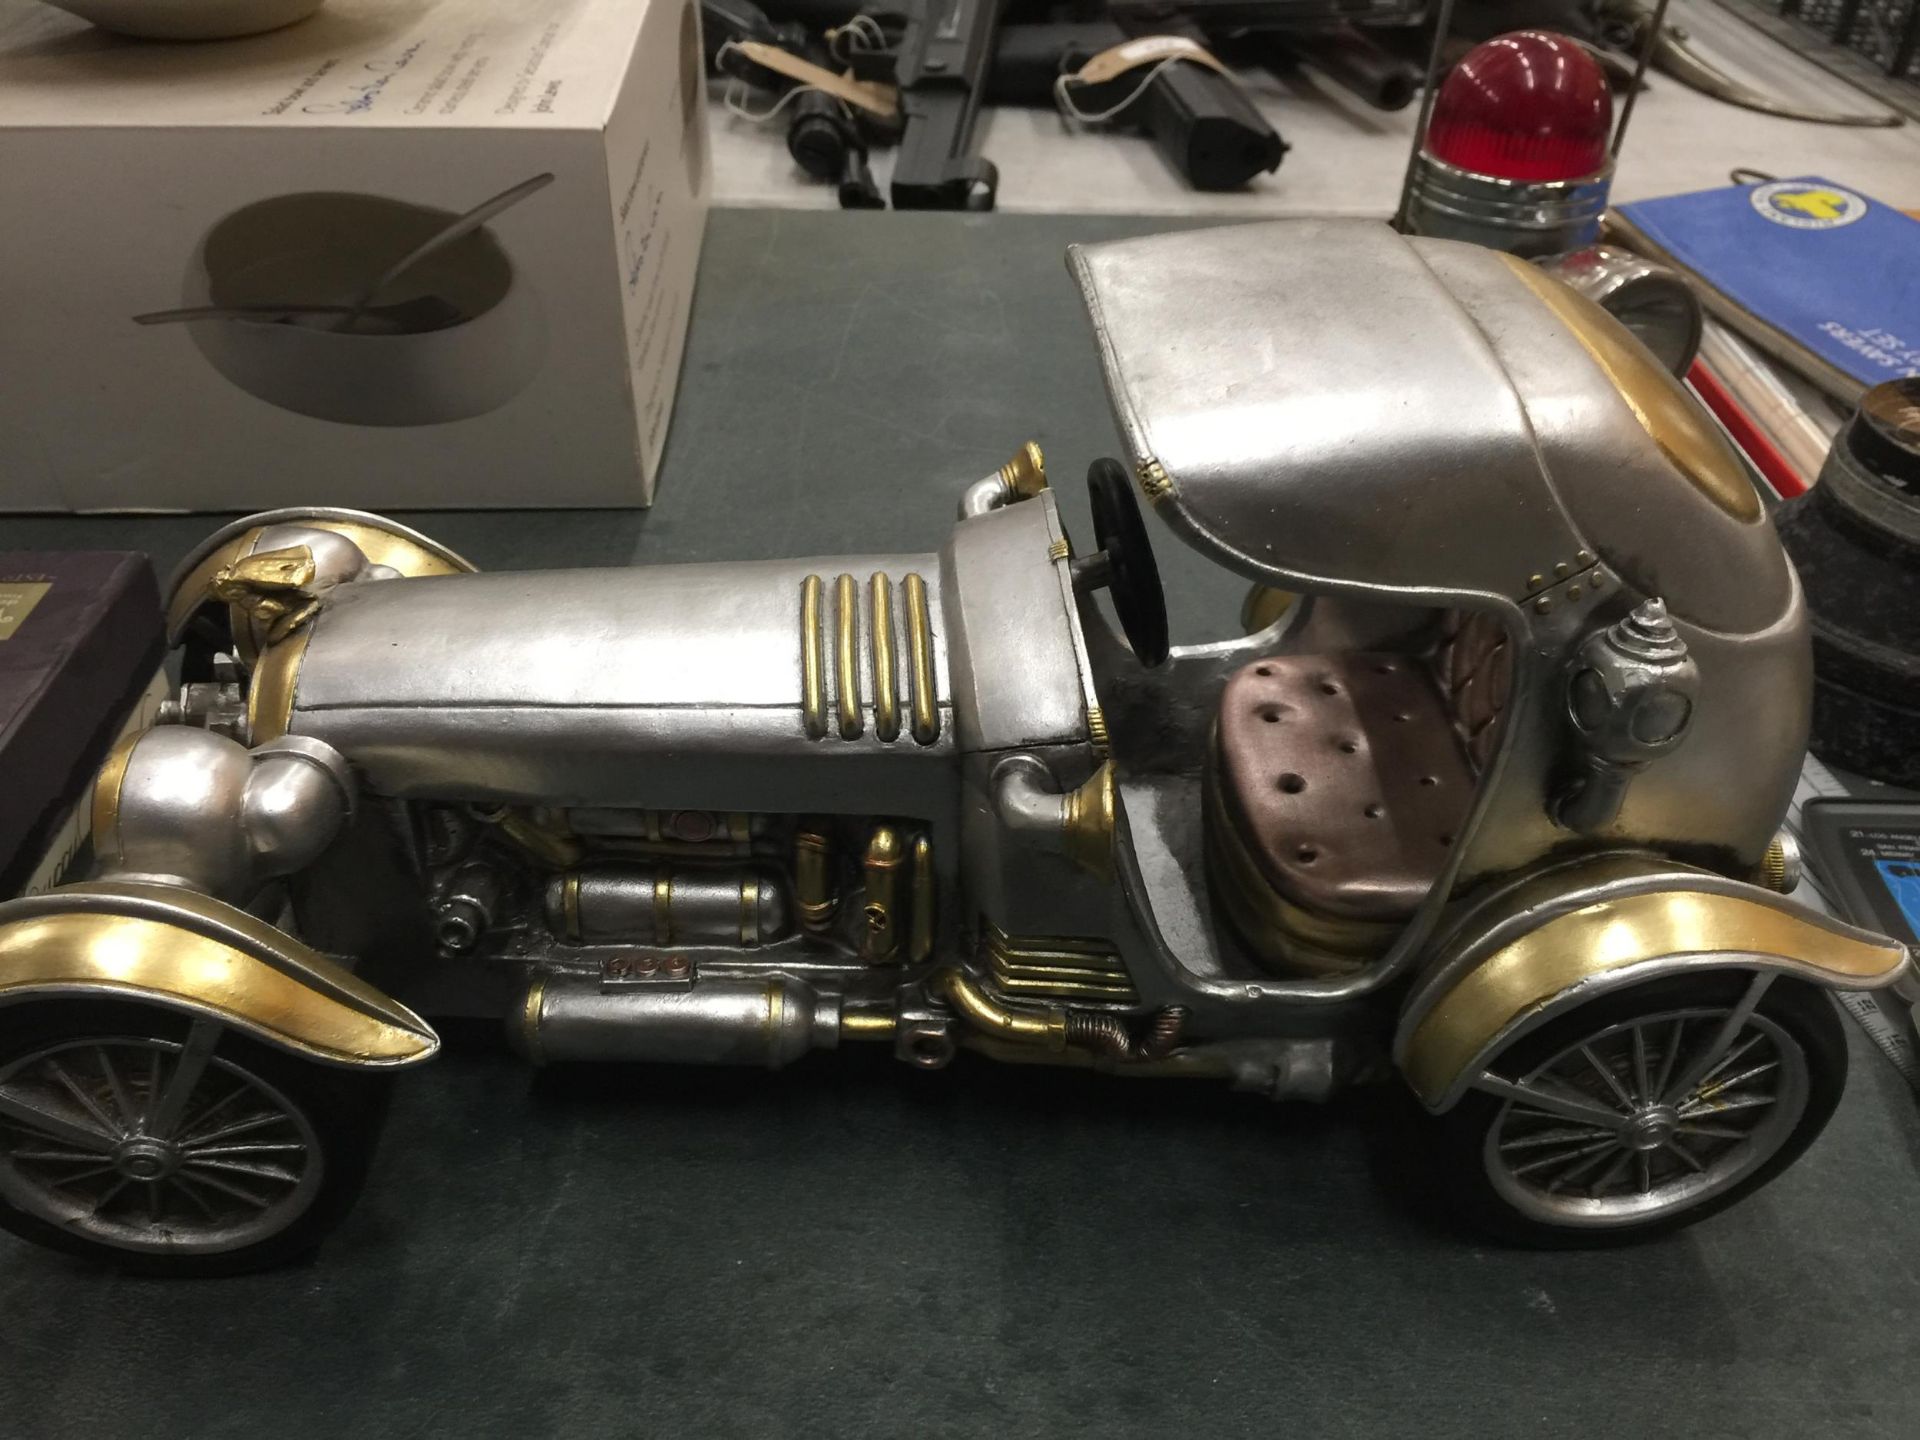 A PEWTER STEAM PUNK CAR - Image 2 of 4